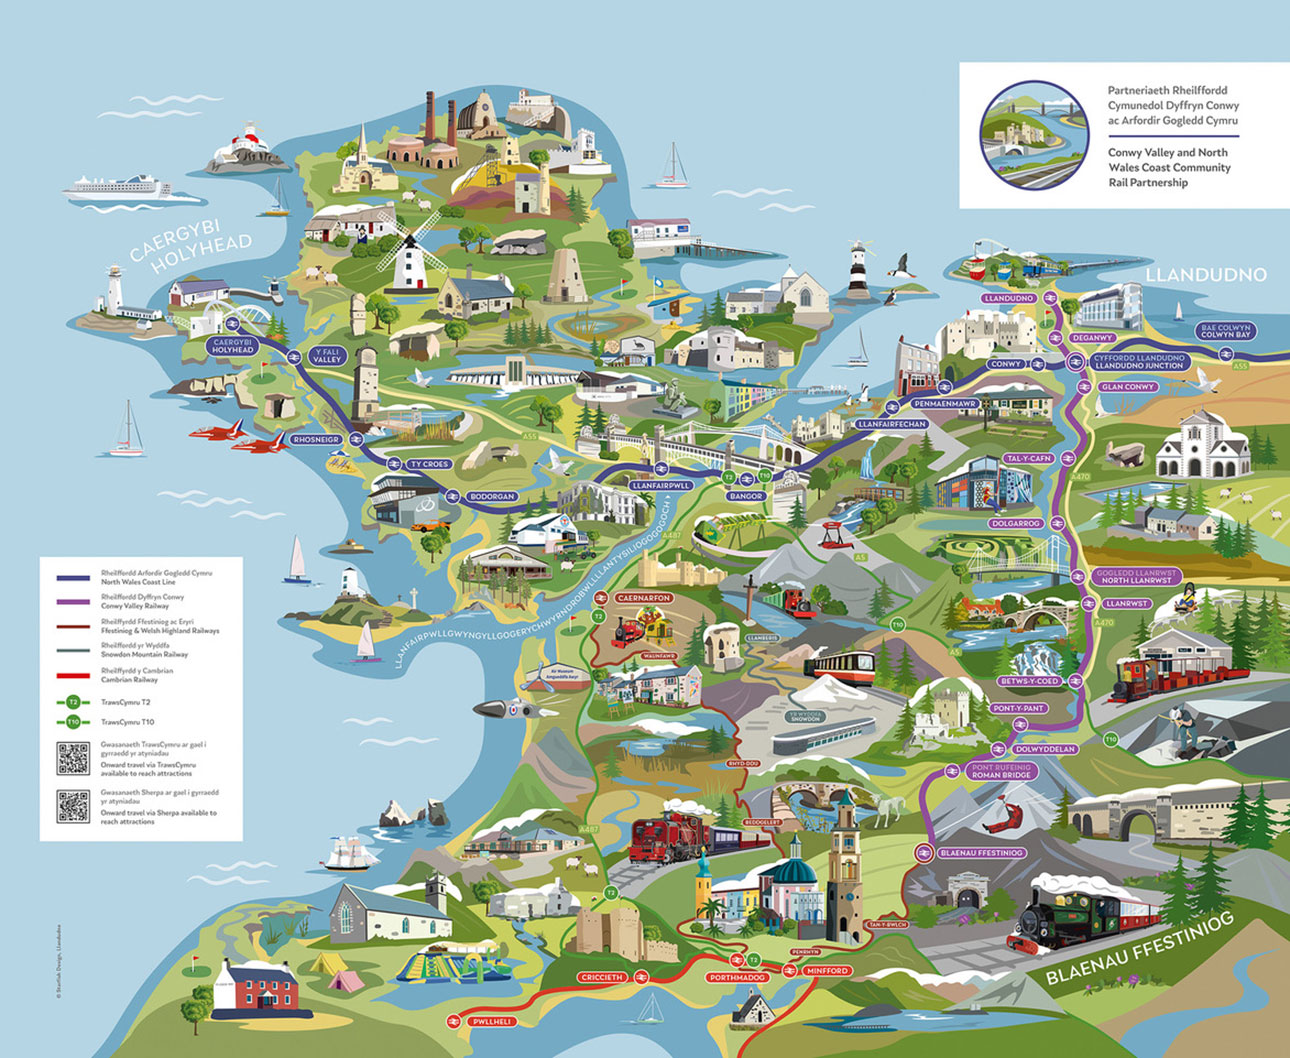 Conwy Valley and North Wales Coast Community Rail Partnership map